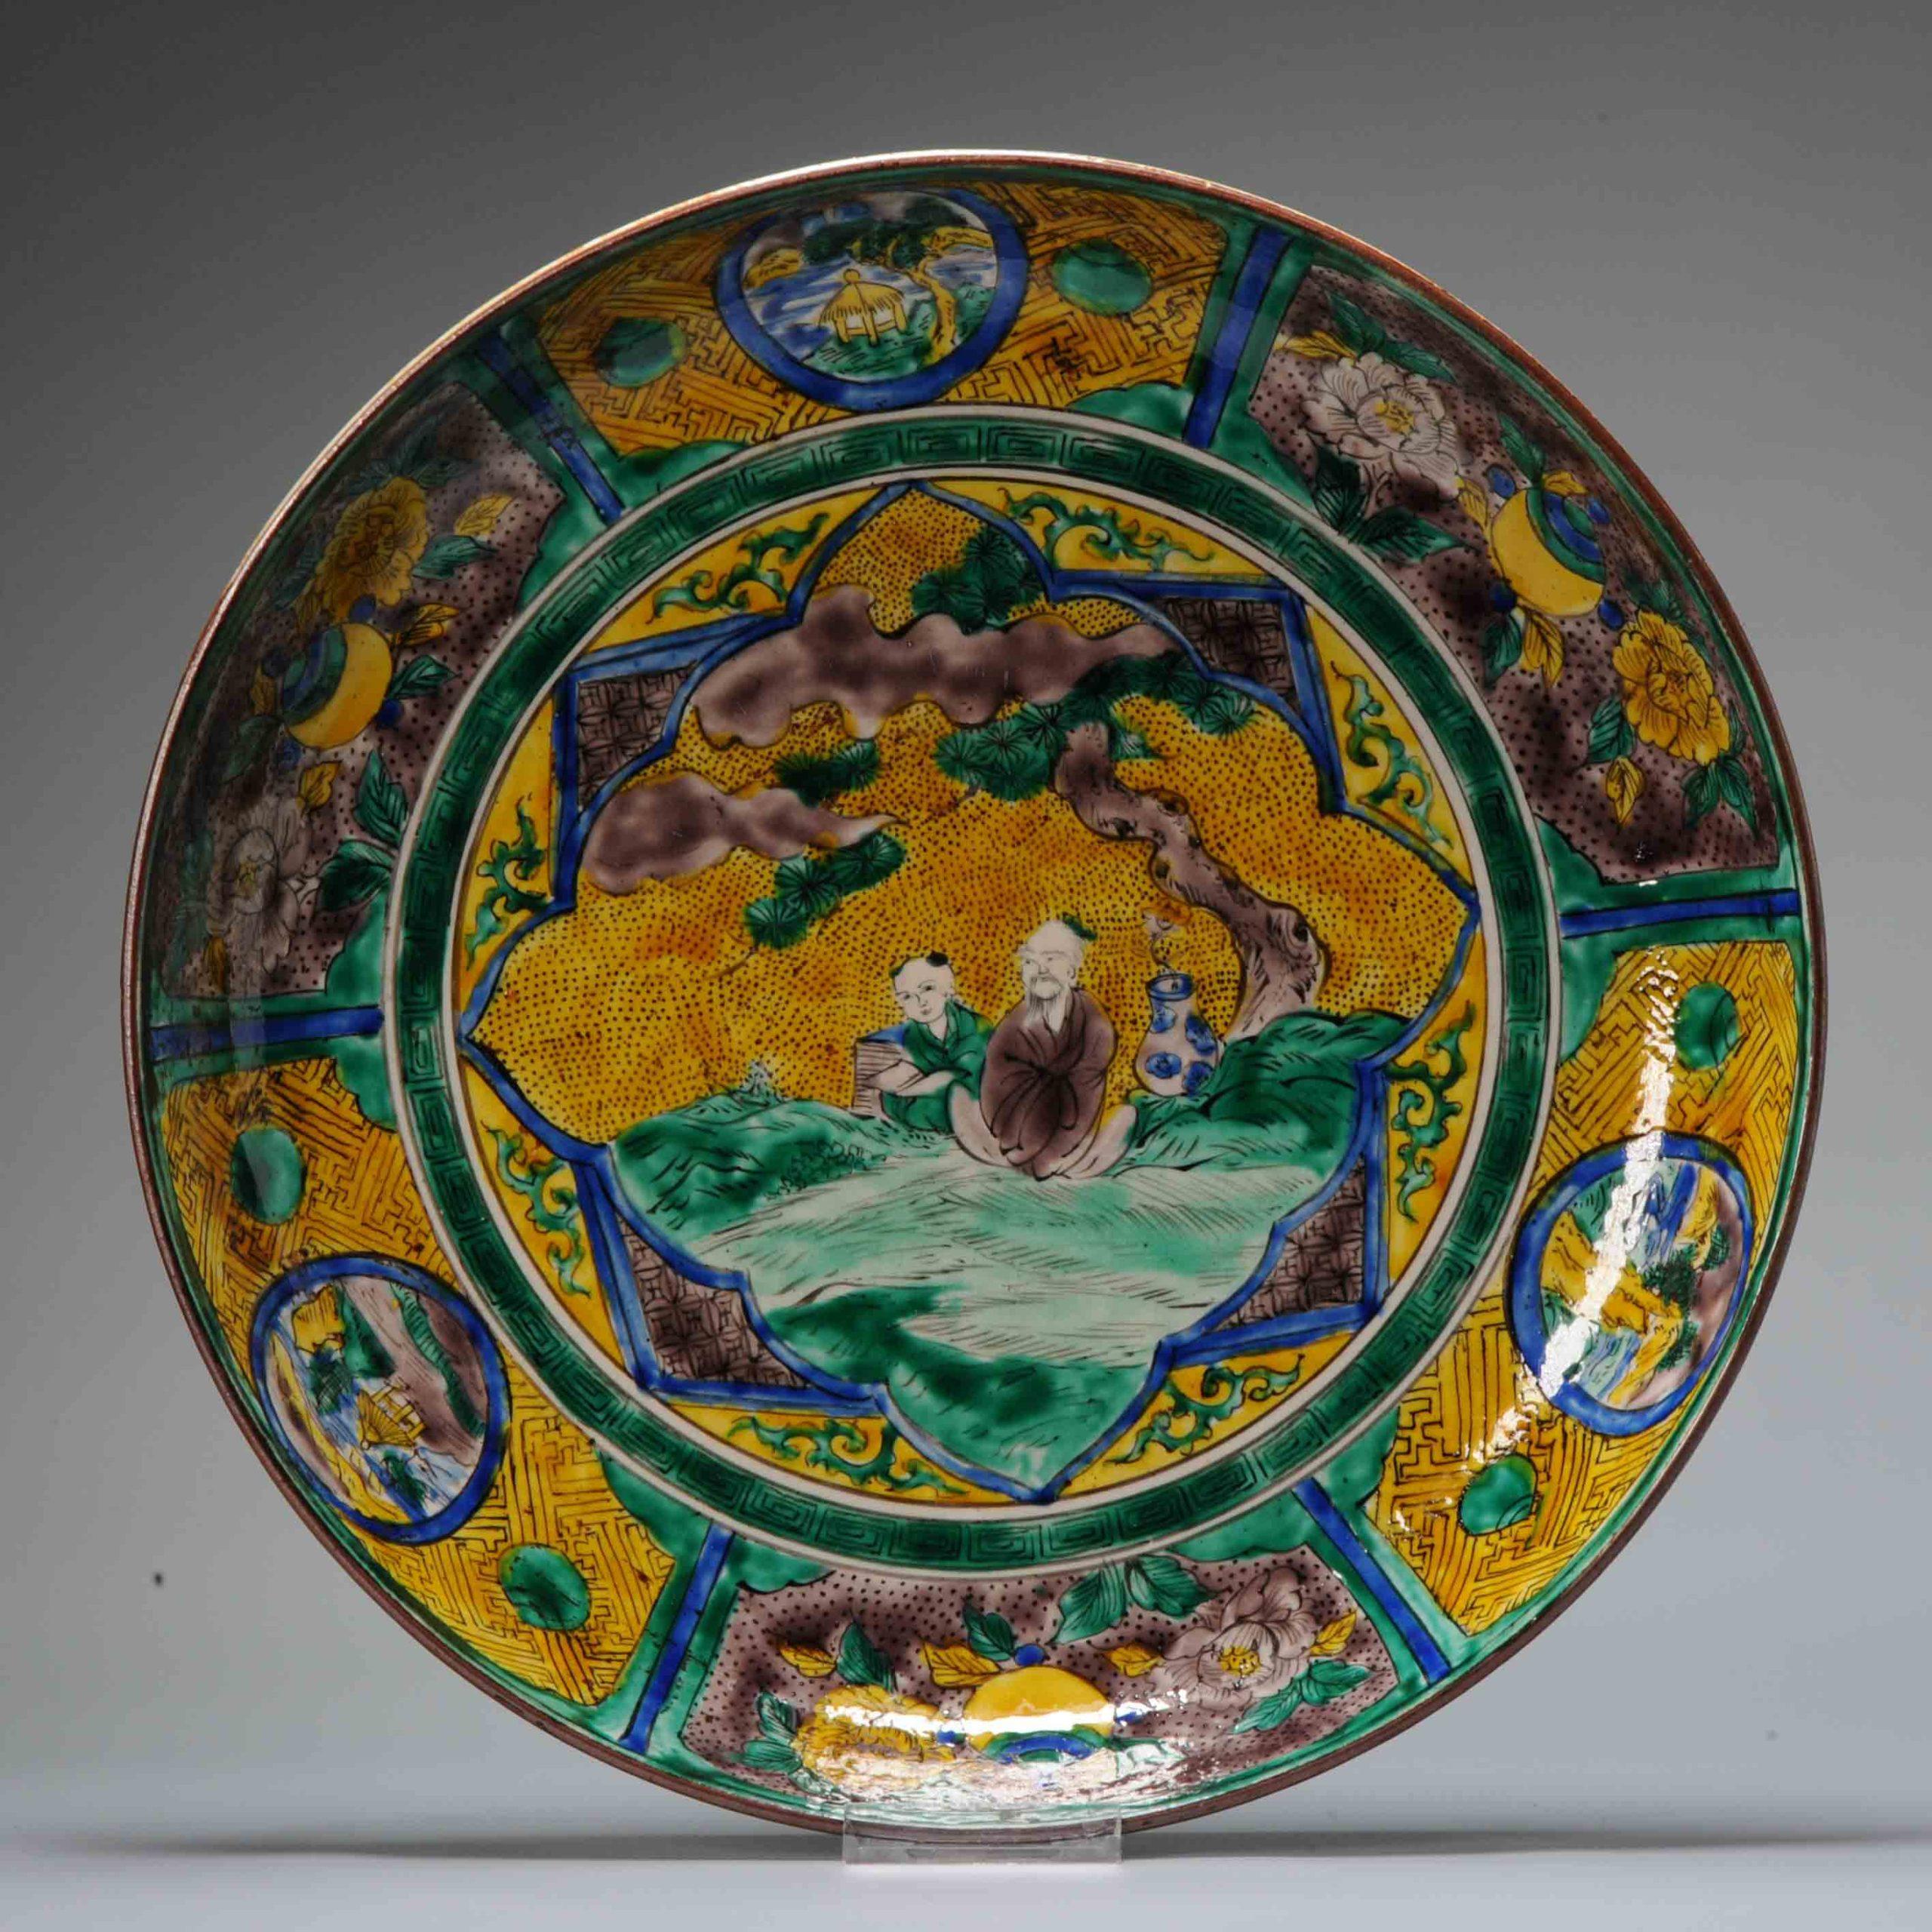 Sharing with you this lovely and unusal Kutani porcelain large dish. The dish is of circular form and has a scene of a wise man and his apprentice in a landscape scene. With beautiful colors and very nicely painted.

Base marked with a Fuku mark.